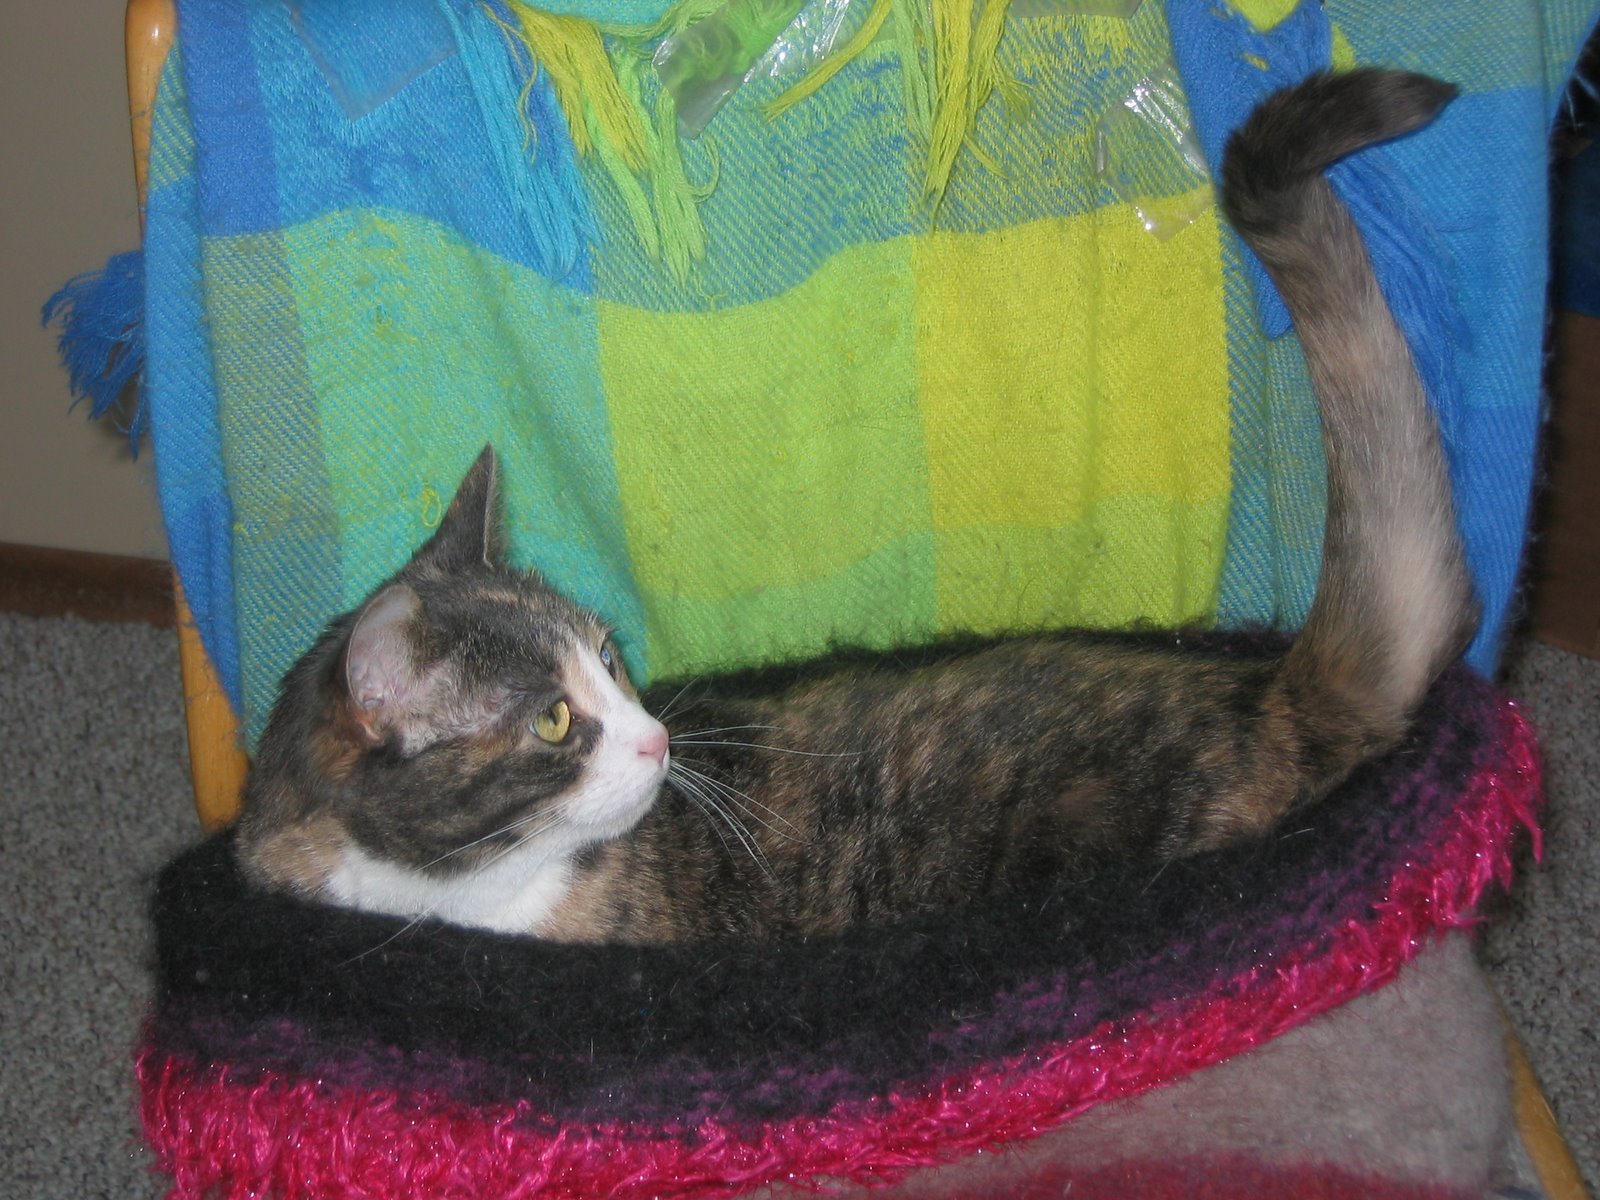 [Solara+in+her+felted+bed+on+her+chair+with+her+tail+in+the+air+July+22,+2008.JPG]